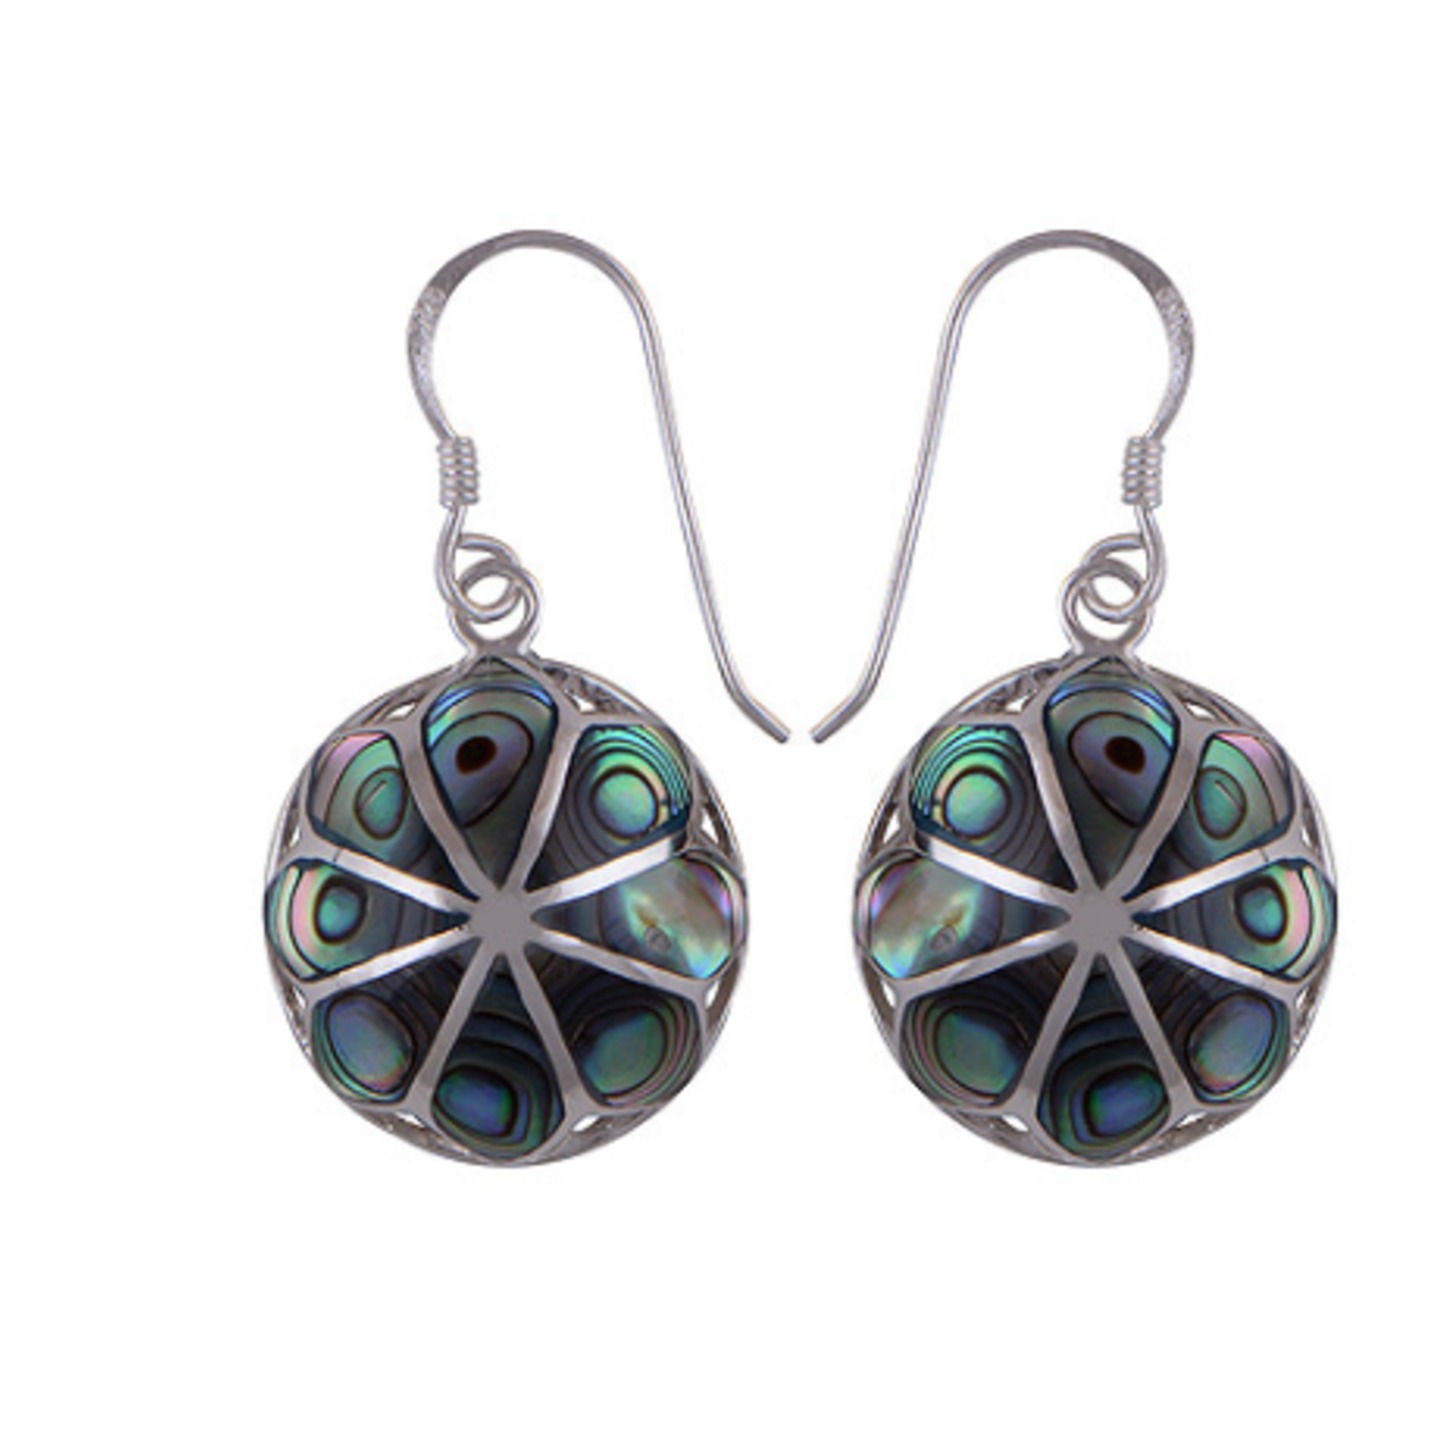 The Abalone Shell Silver Earrings